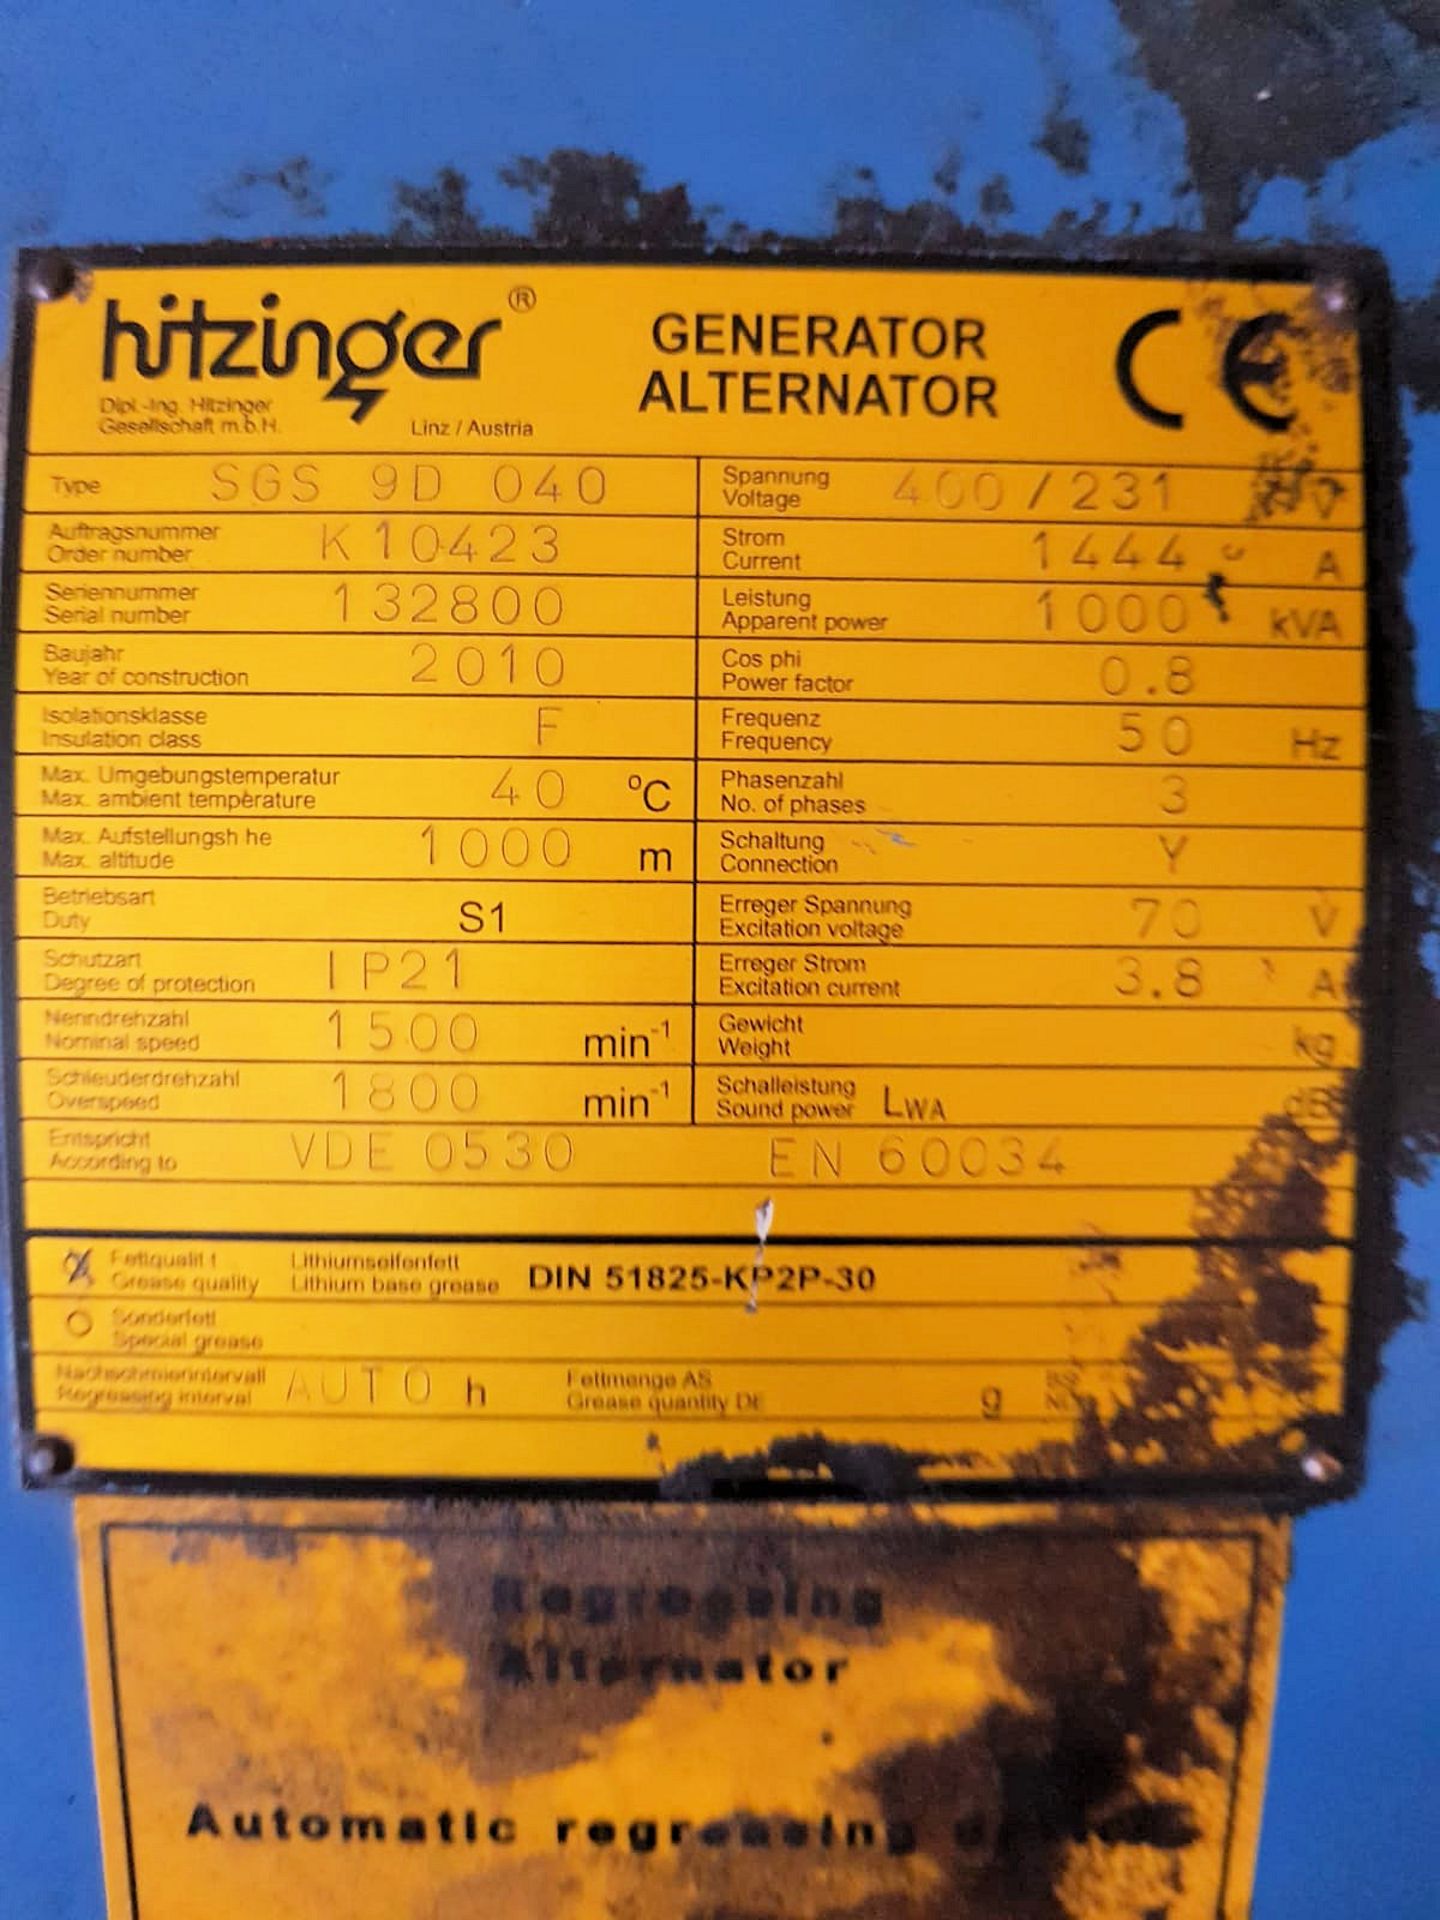 1 x 1987 Hitzinger SGS 9D 040 Generator - Only 800 Hours Use - Ref: T4UB/HZ - CL333 - Location: - Image 3 of 20